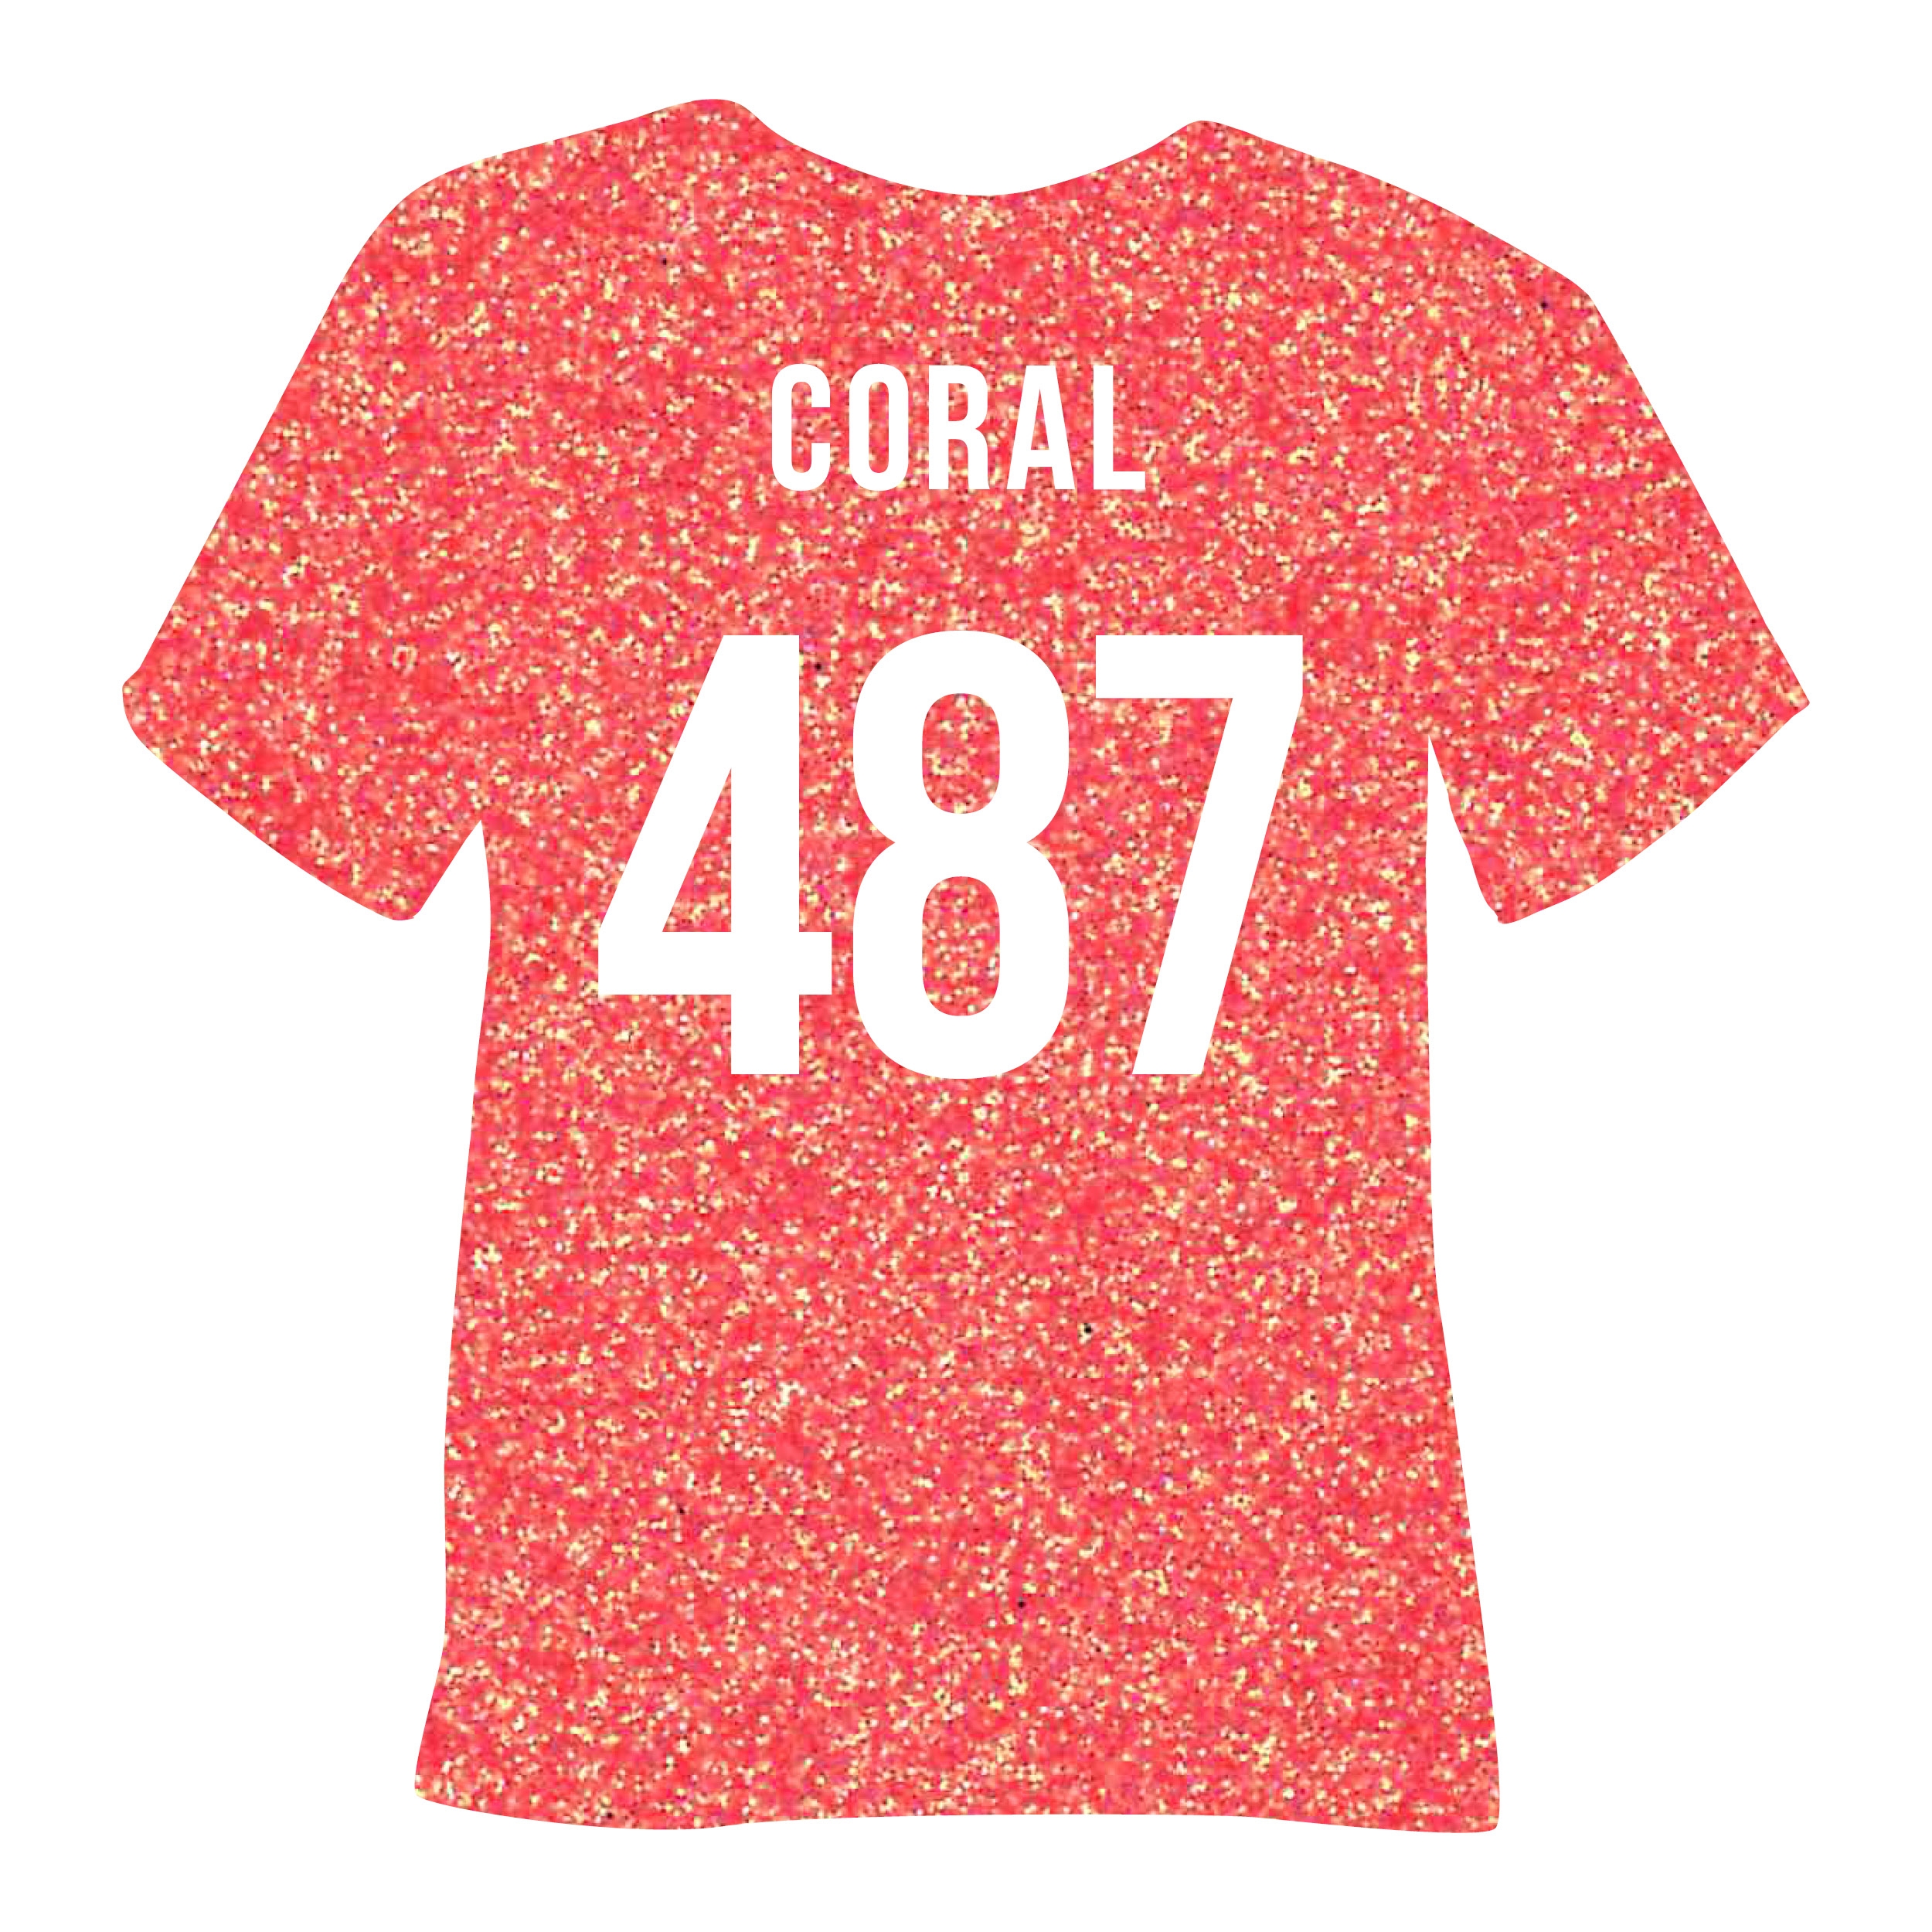 487 coral